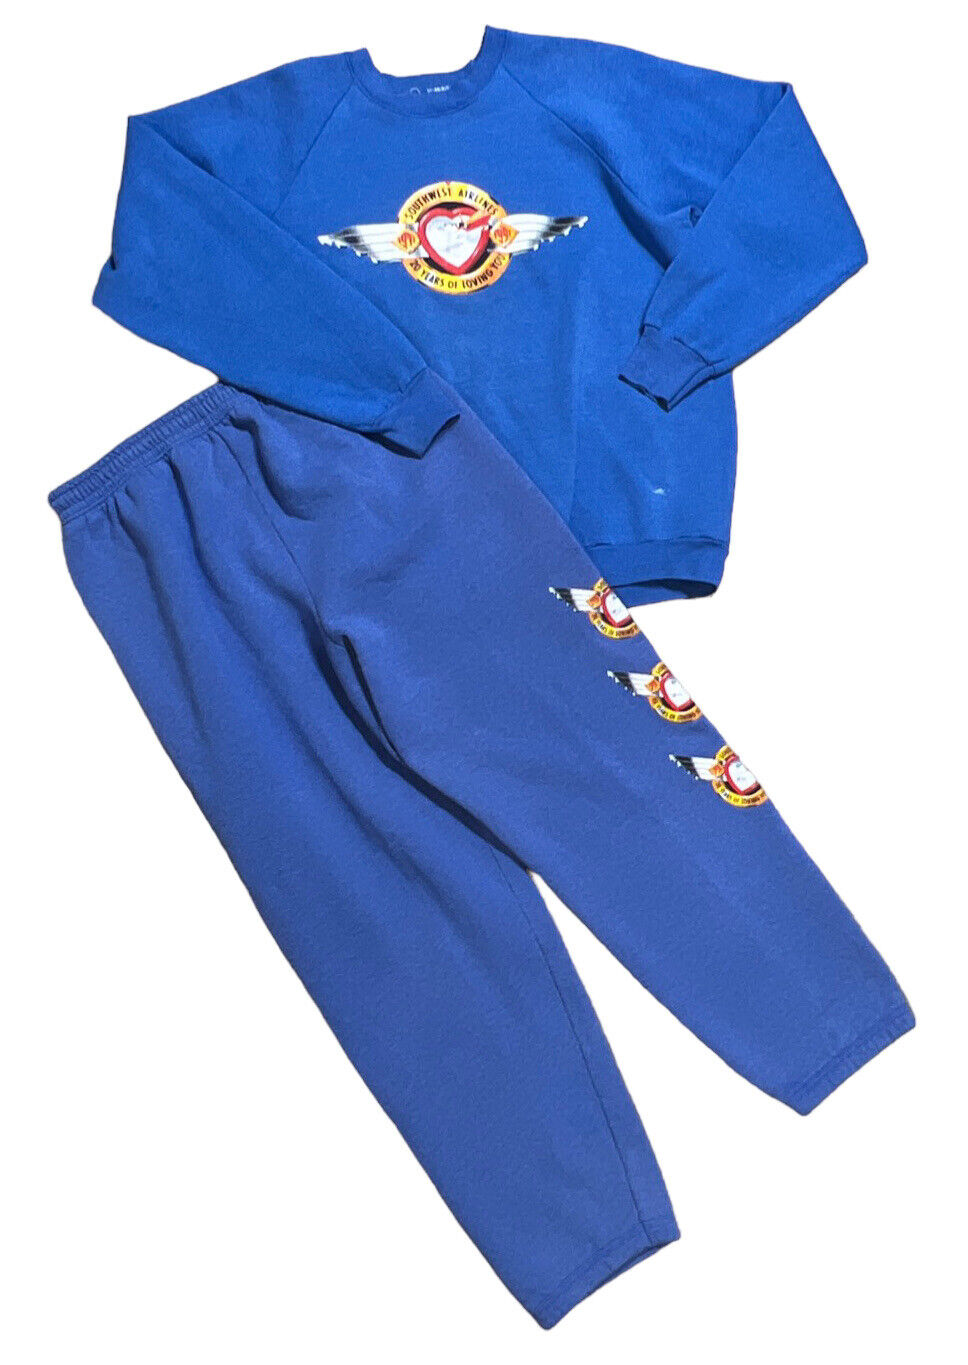 Vtg SOUTHWEST AIRLINES 20 Years IF LOVING YOU Employee Jogging Suit XXL Women’s